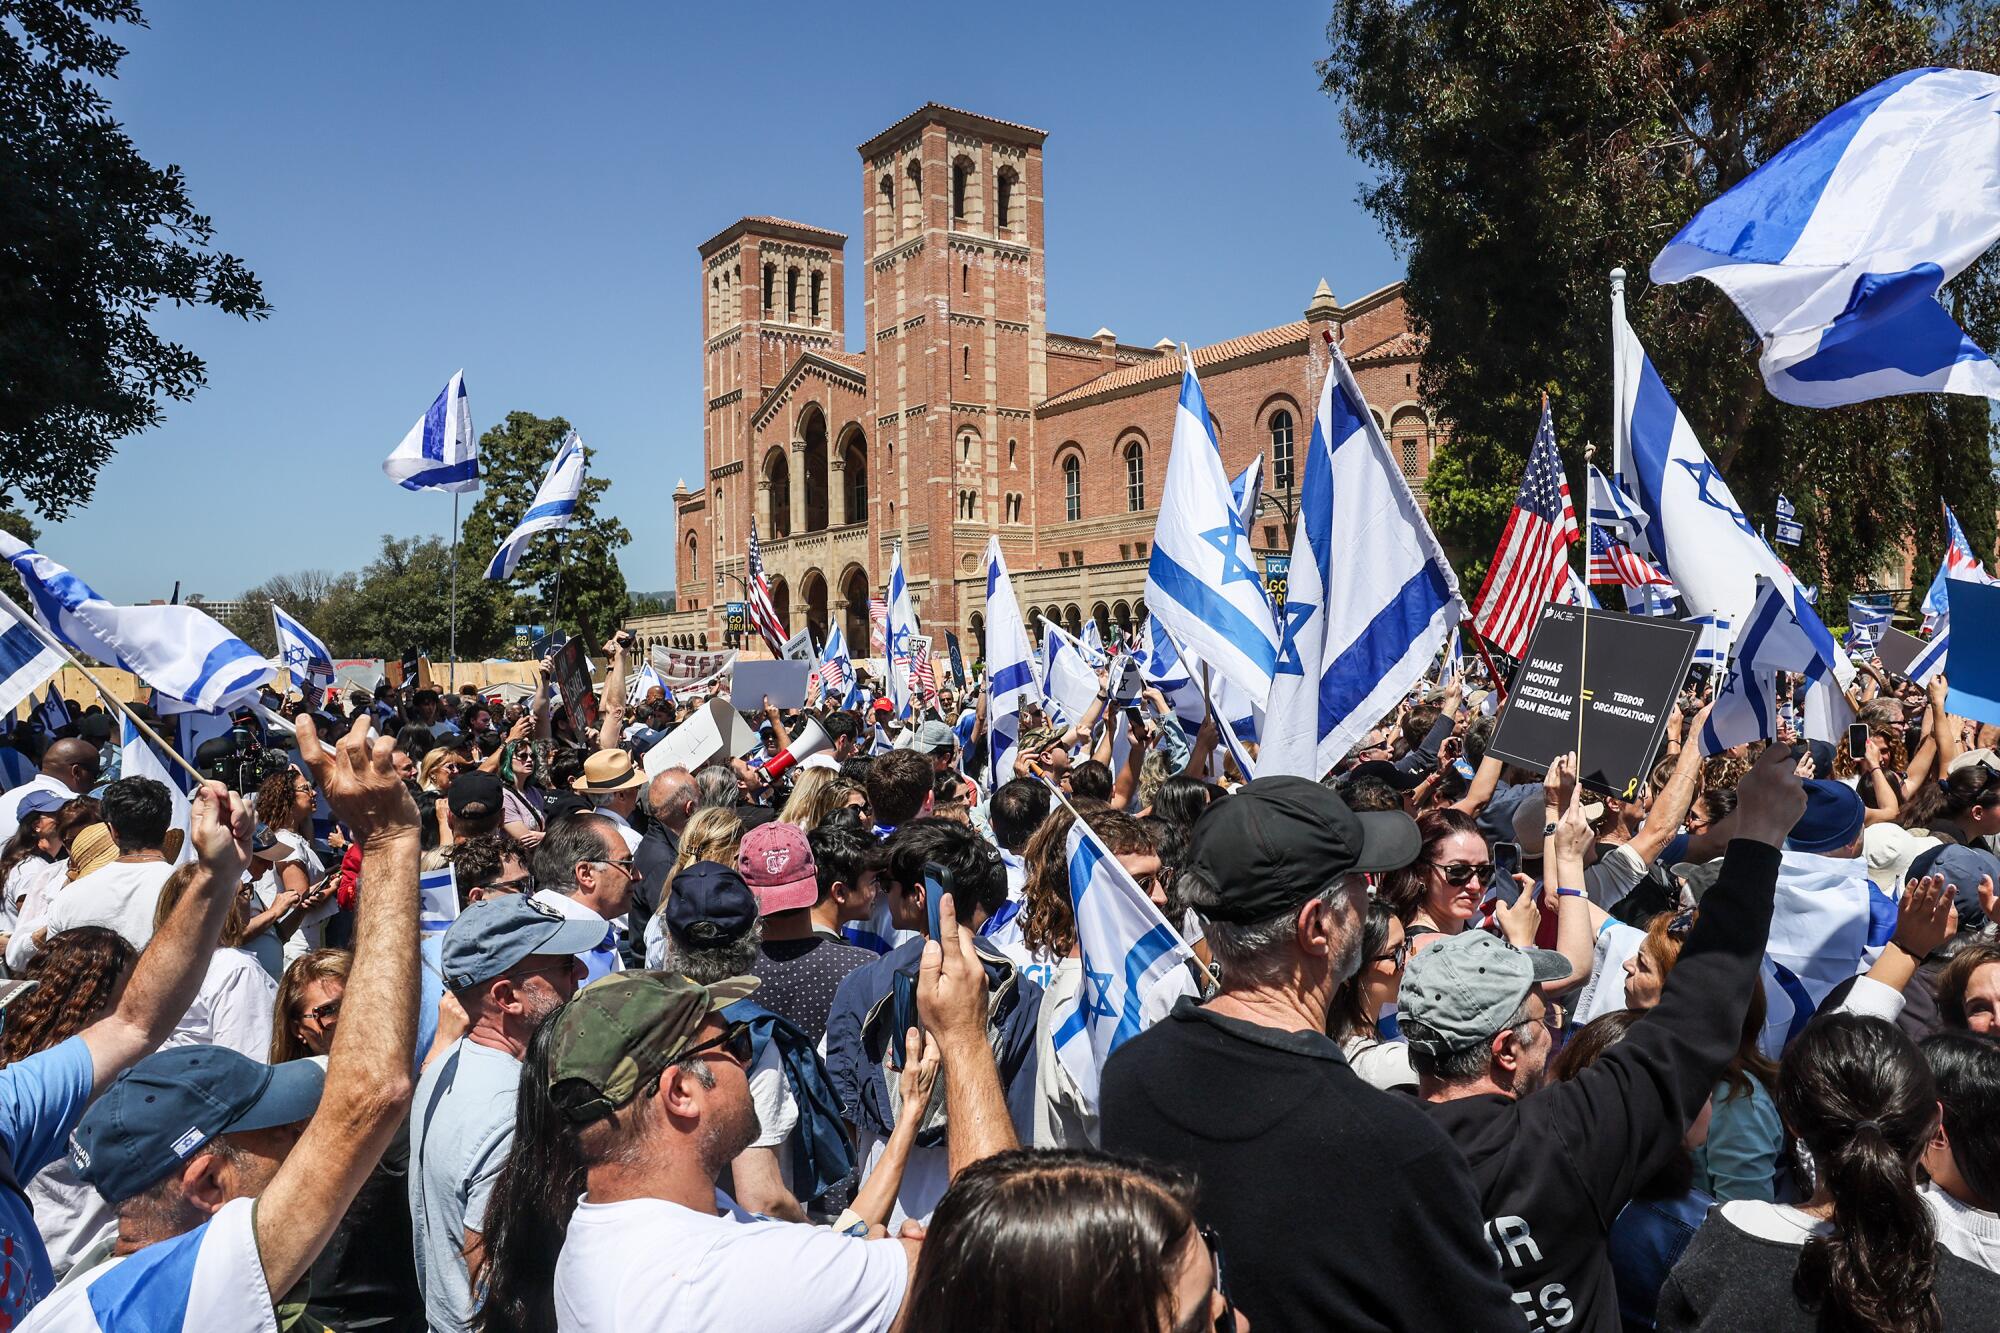 Thousands rally for Israel as pro-Palestinian counter demonstrators surround them at UCLA.